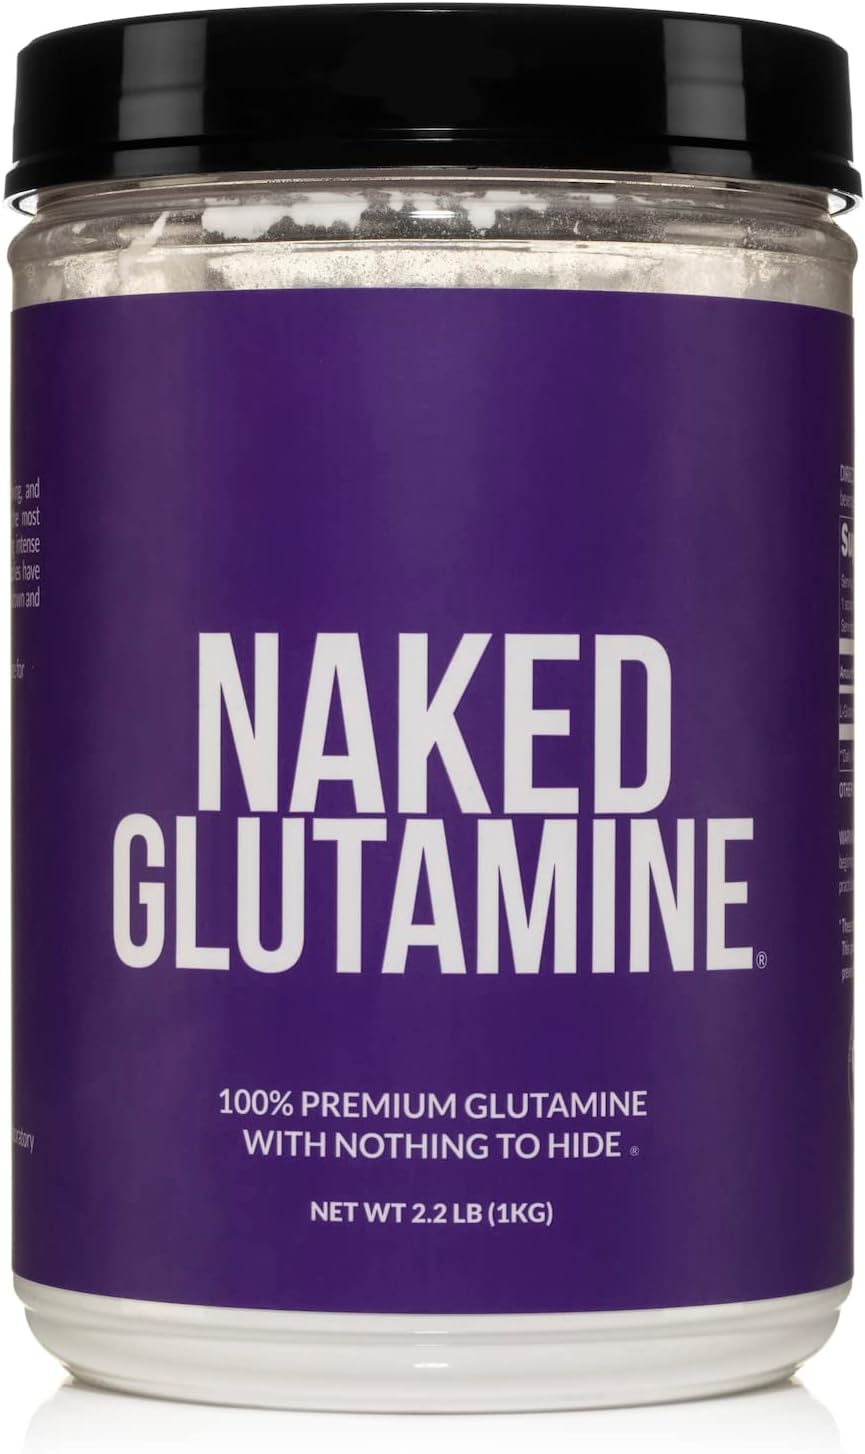 Pure L-Glutamine Made in The USA - 200 Servings - 1,000g, 2.2lb Bulk, Vegan, Non-GMO, Gluten and Soy Free. Minimize Muscle Breakdown & Improve Protein Synthesis. Nothing Artificial